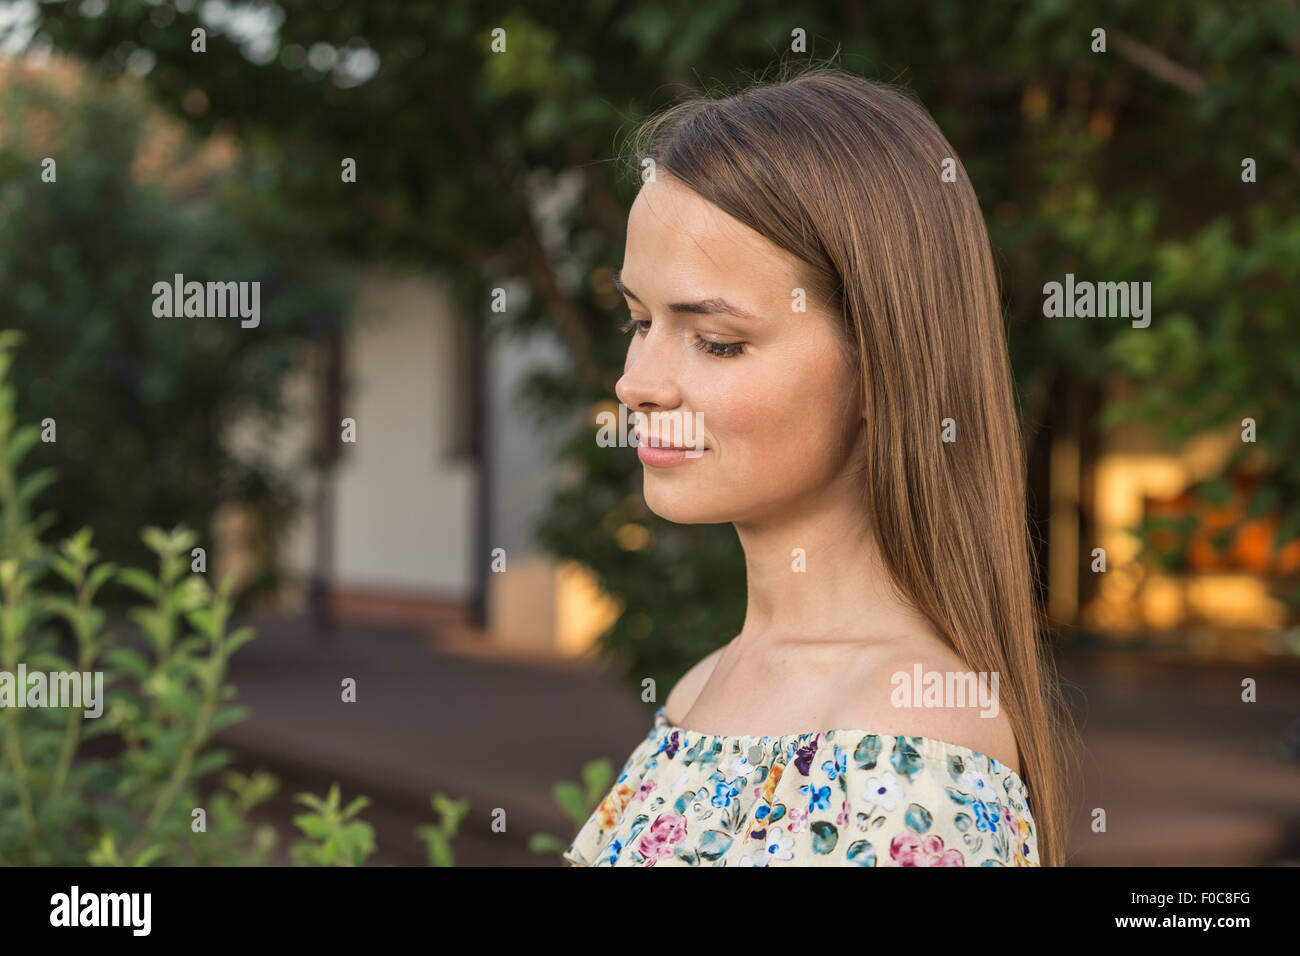 Side view of beautiful young woman outdoors Stock Photo